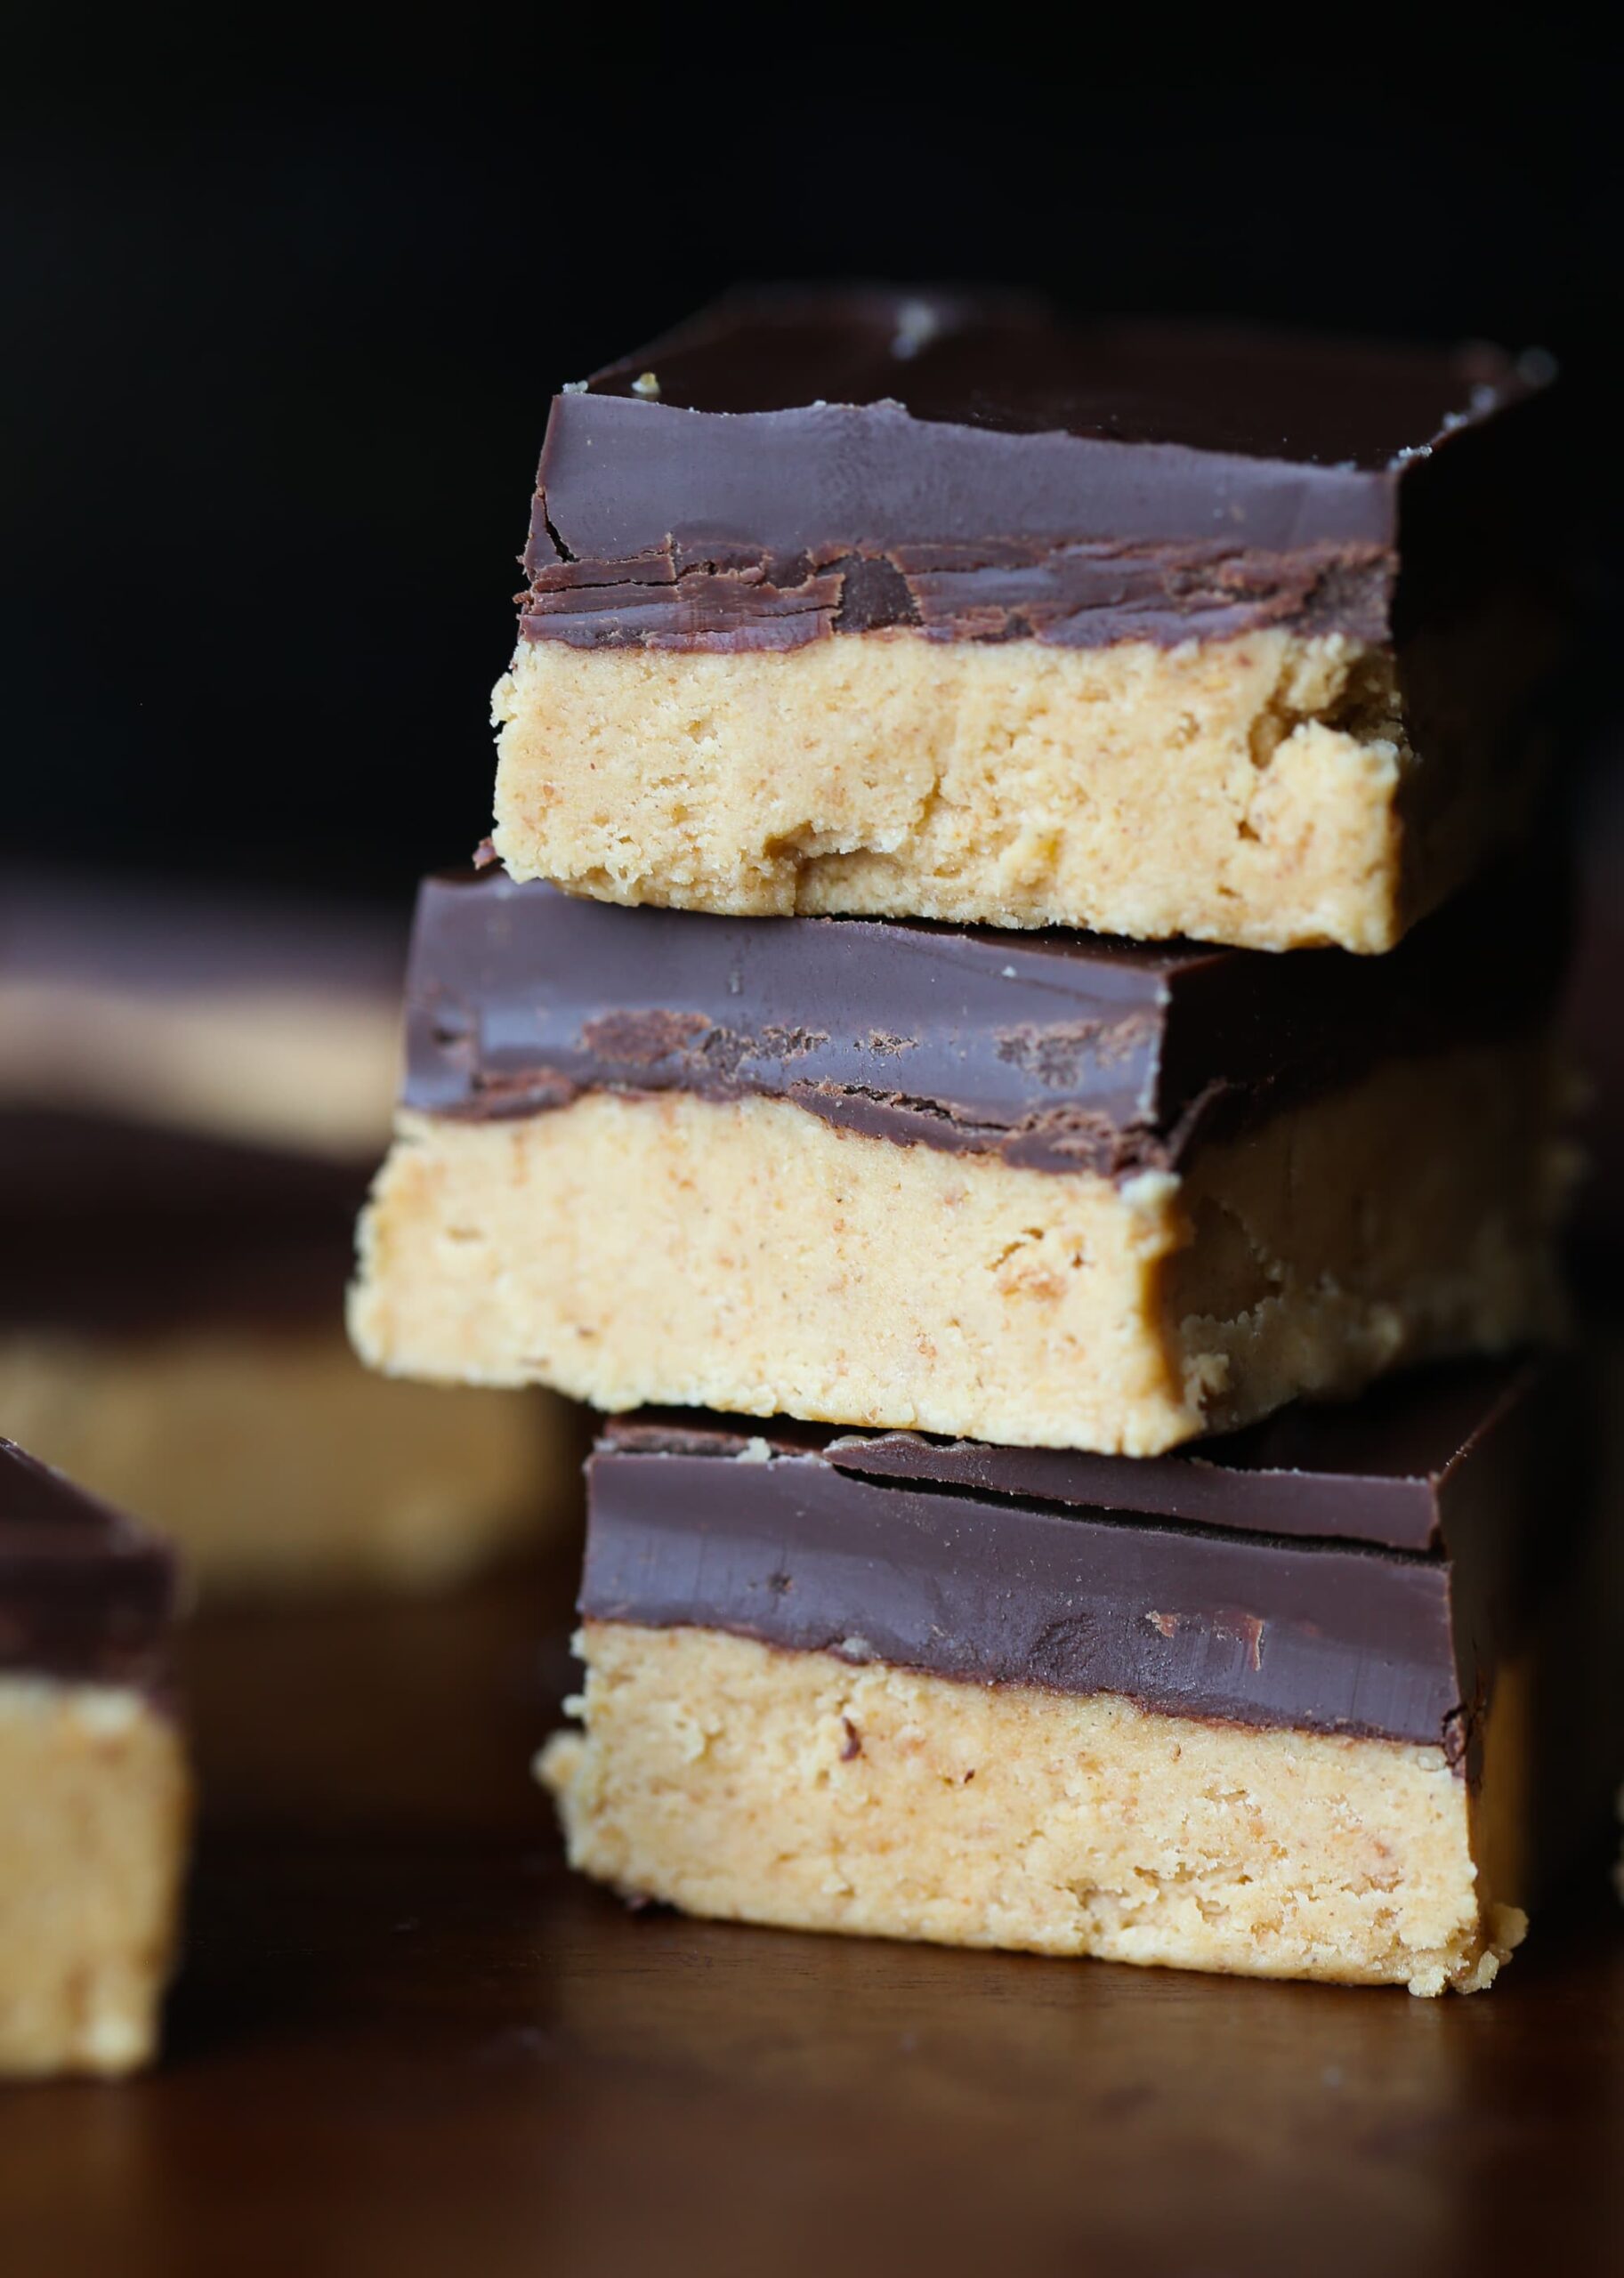 Image of No Bake Chocolate and Honey Peanut Butter Bars, Stacked